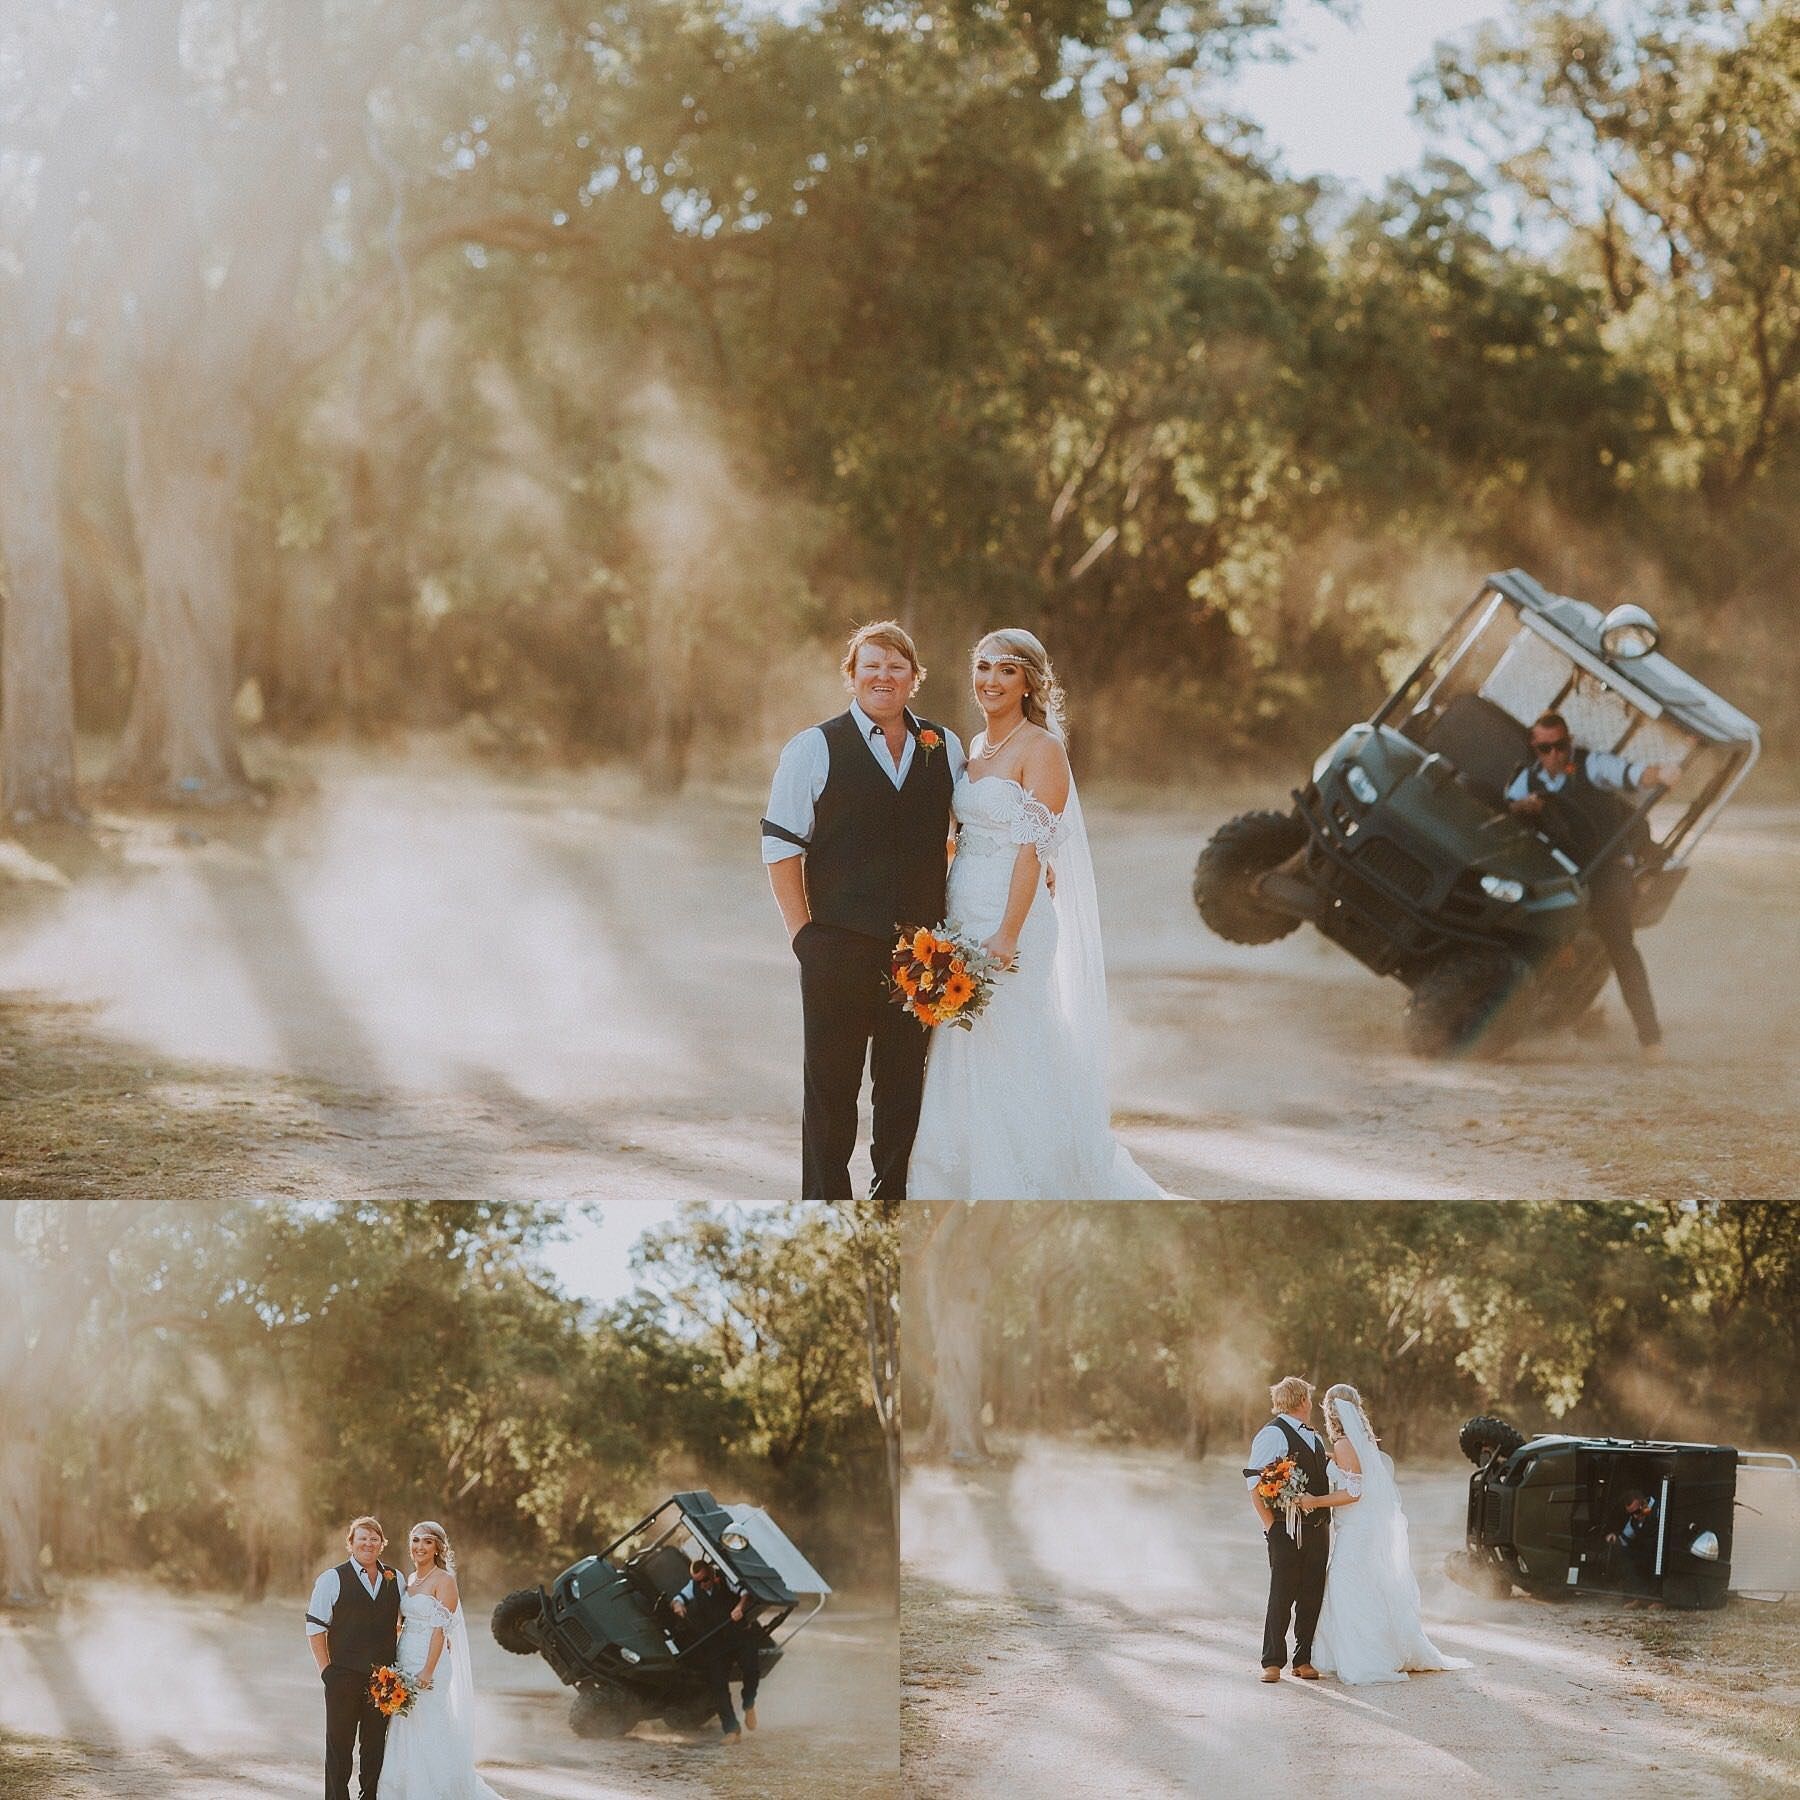 This couple wanted dust in the air for their wedding photos, the best man made it happen...and then some